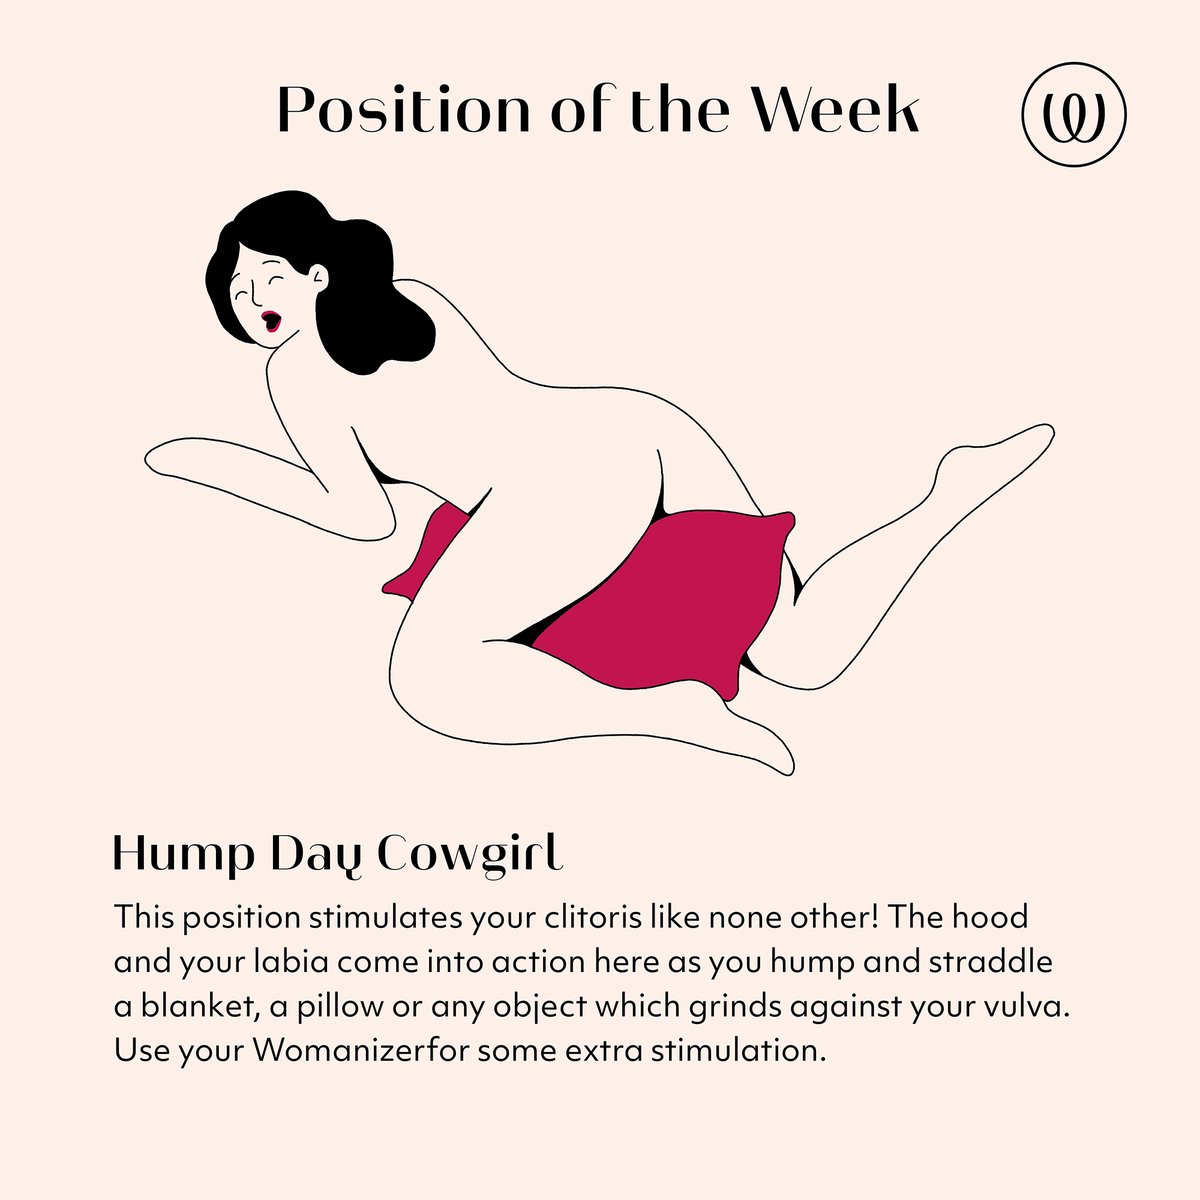 It's Hump Day, so it would be rude not to try this position..